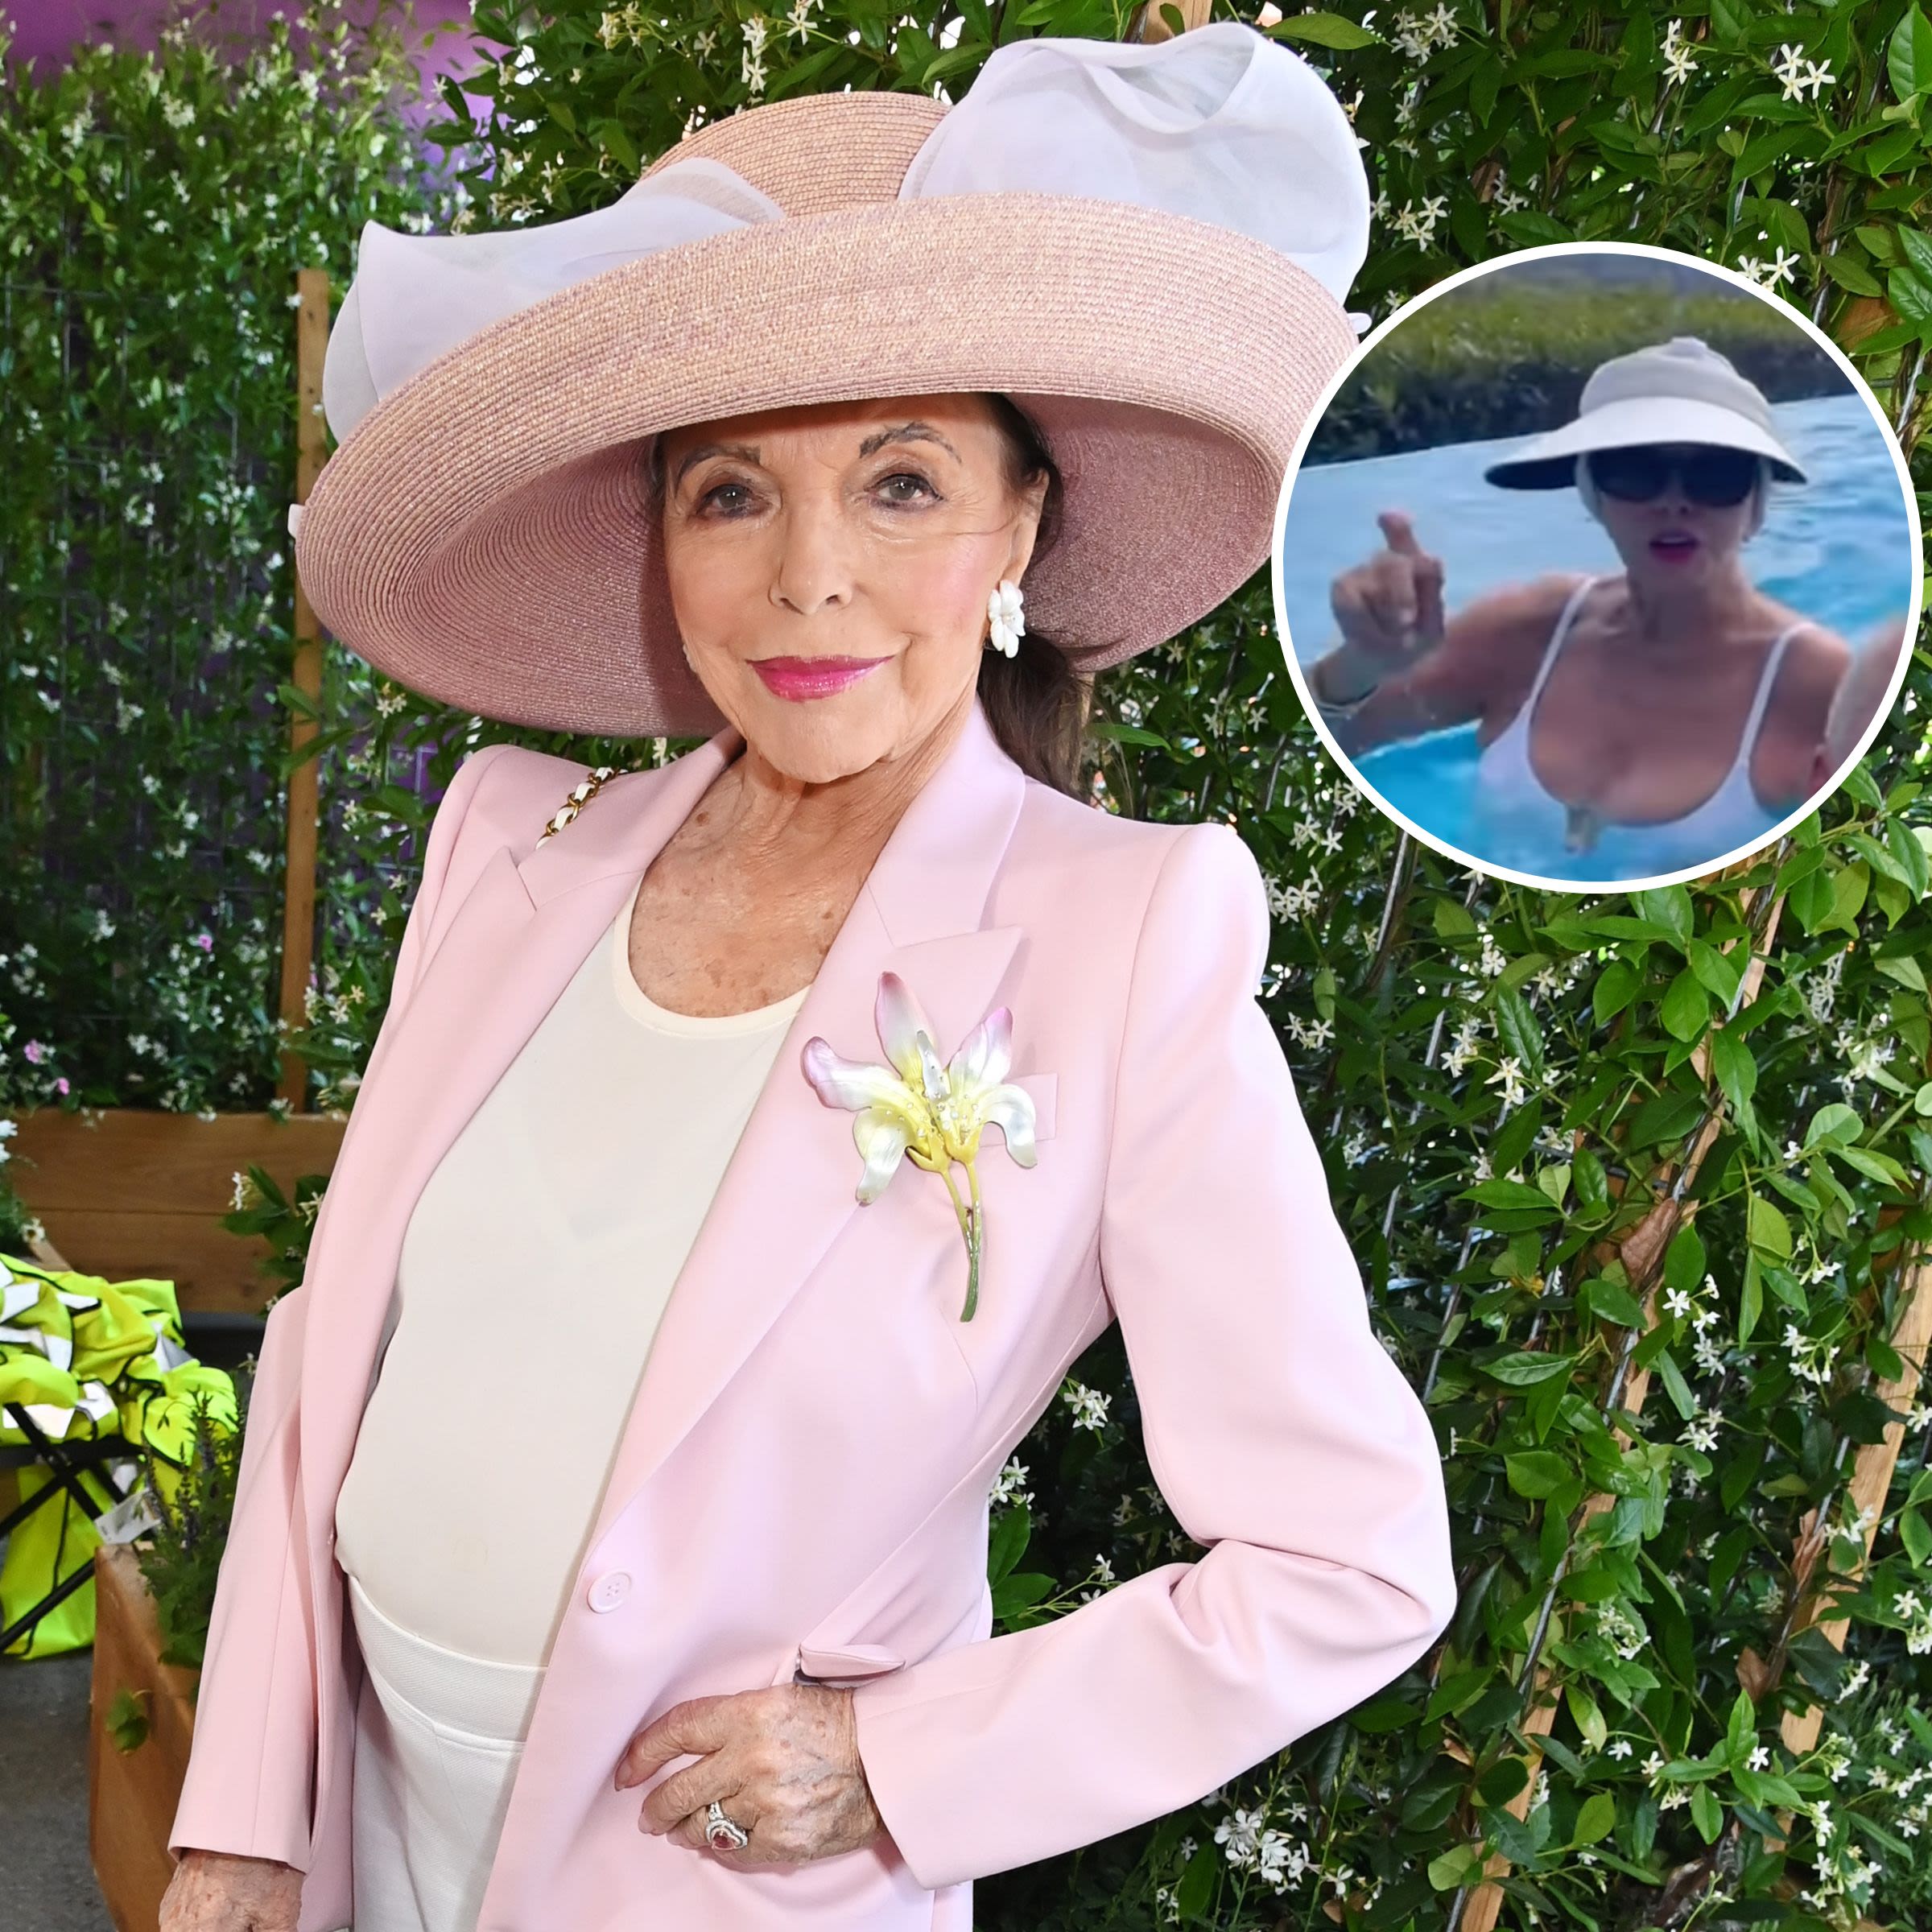 Joan Collins Stuns While Dancing in White Swimsuit in New Video at Age 91: ‘Happy’